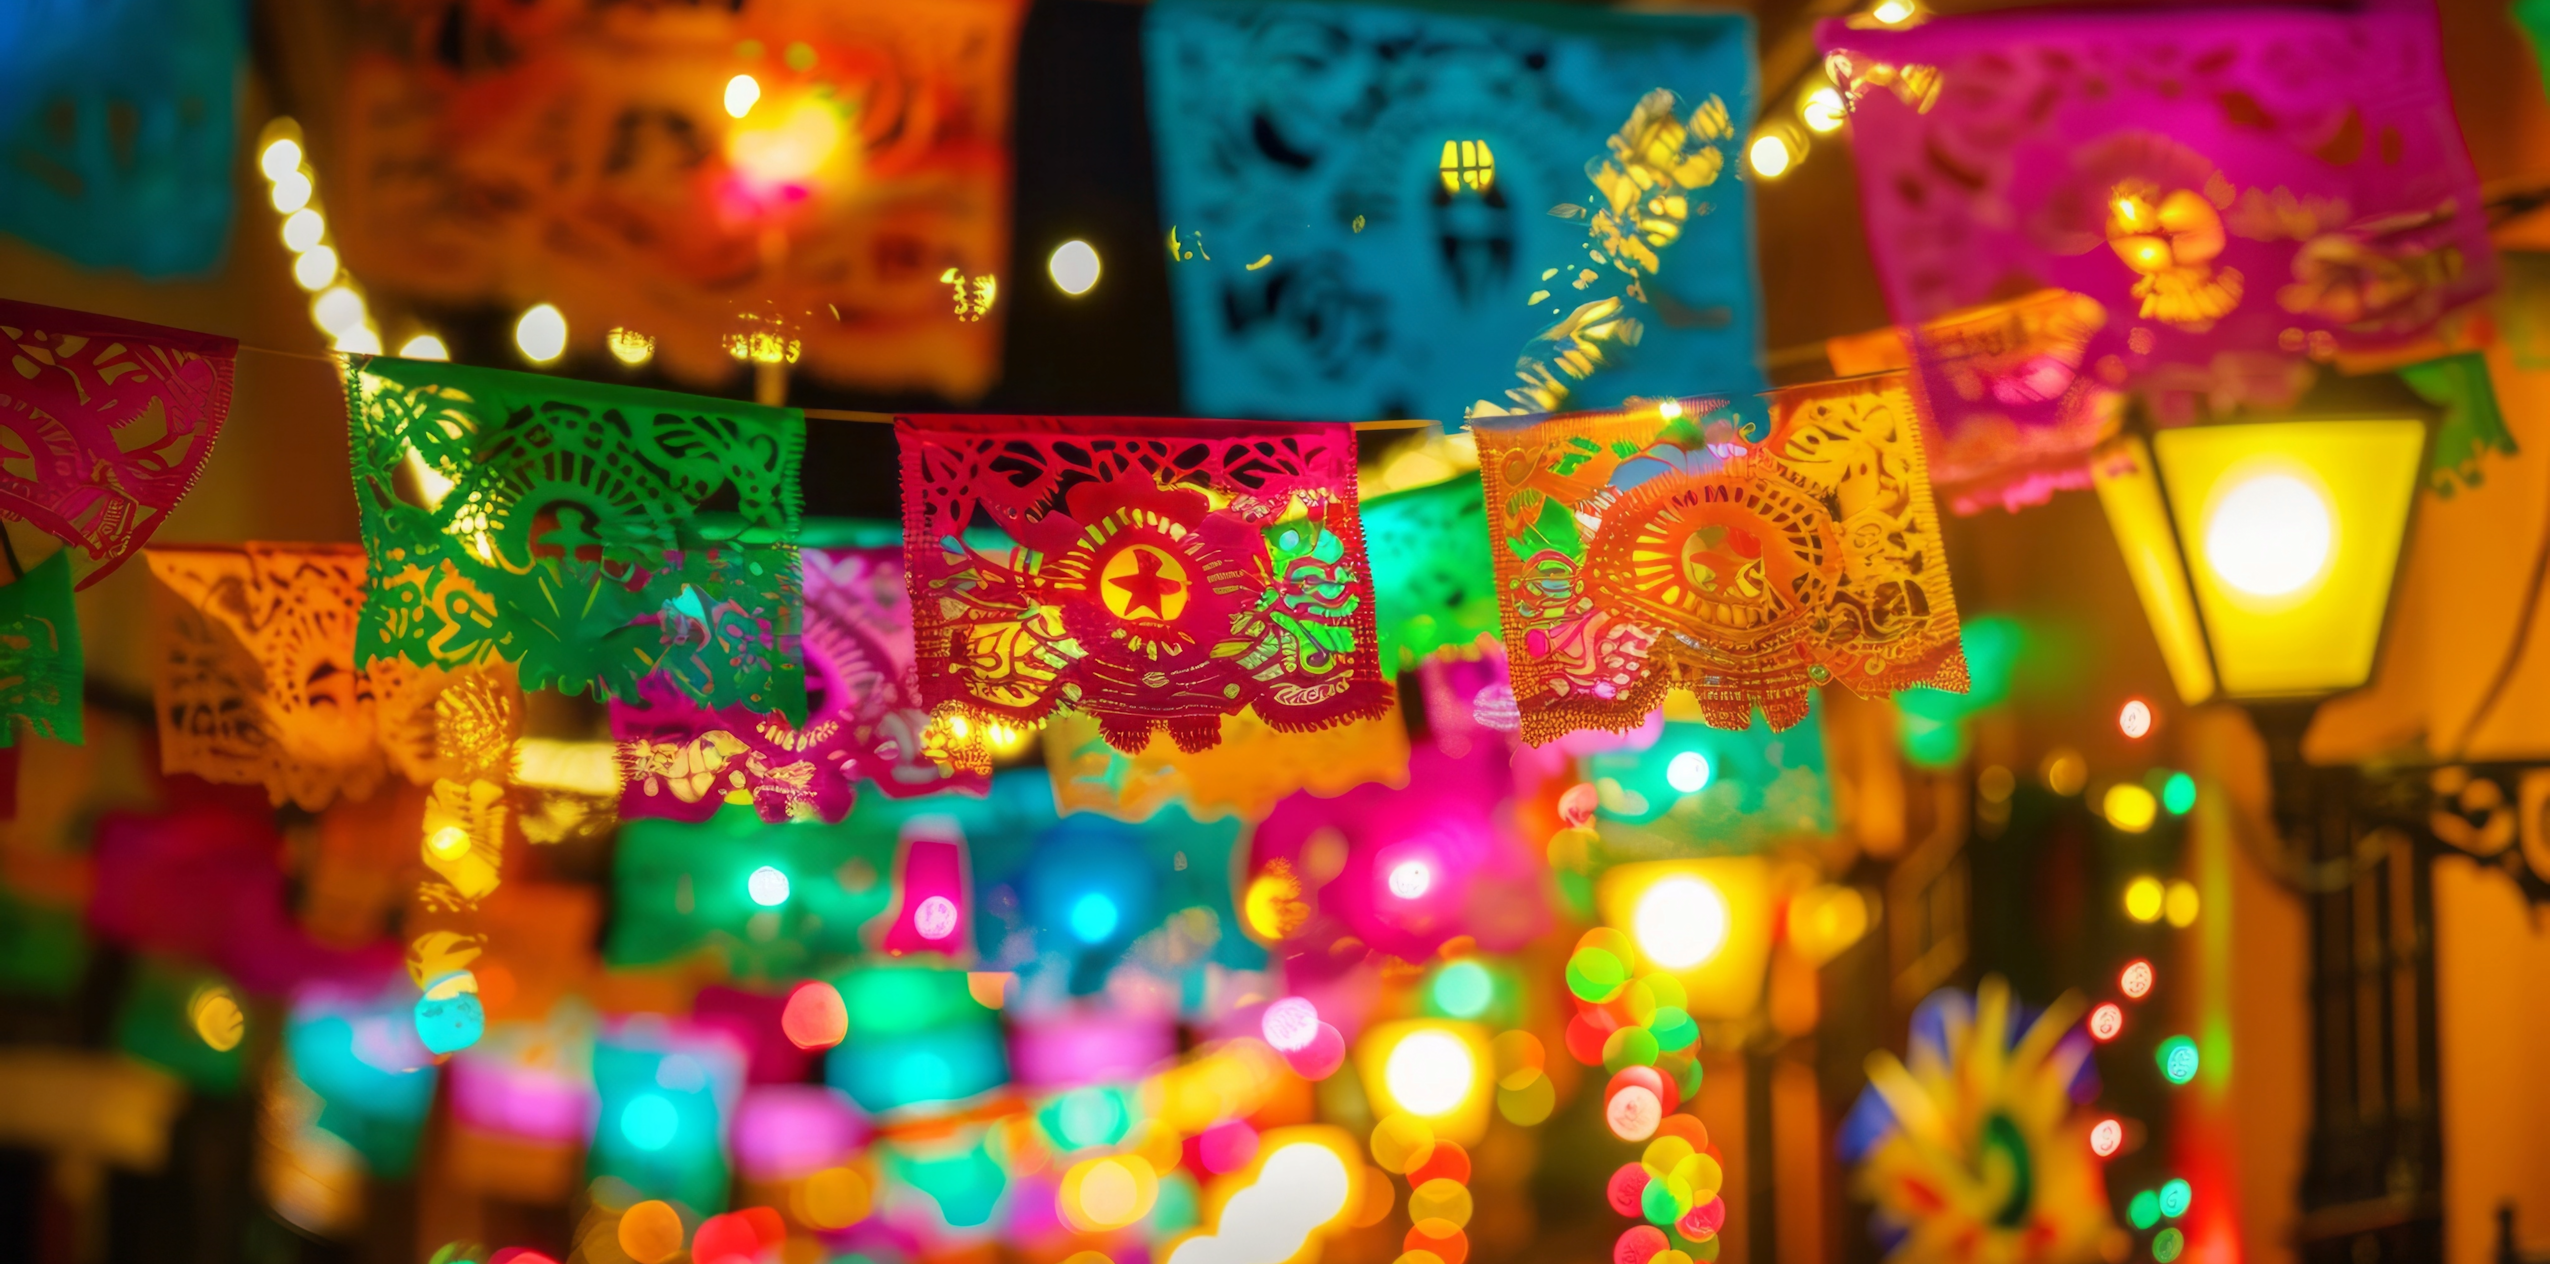 Colorful papel picado hanging from the ceiling with string lights